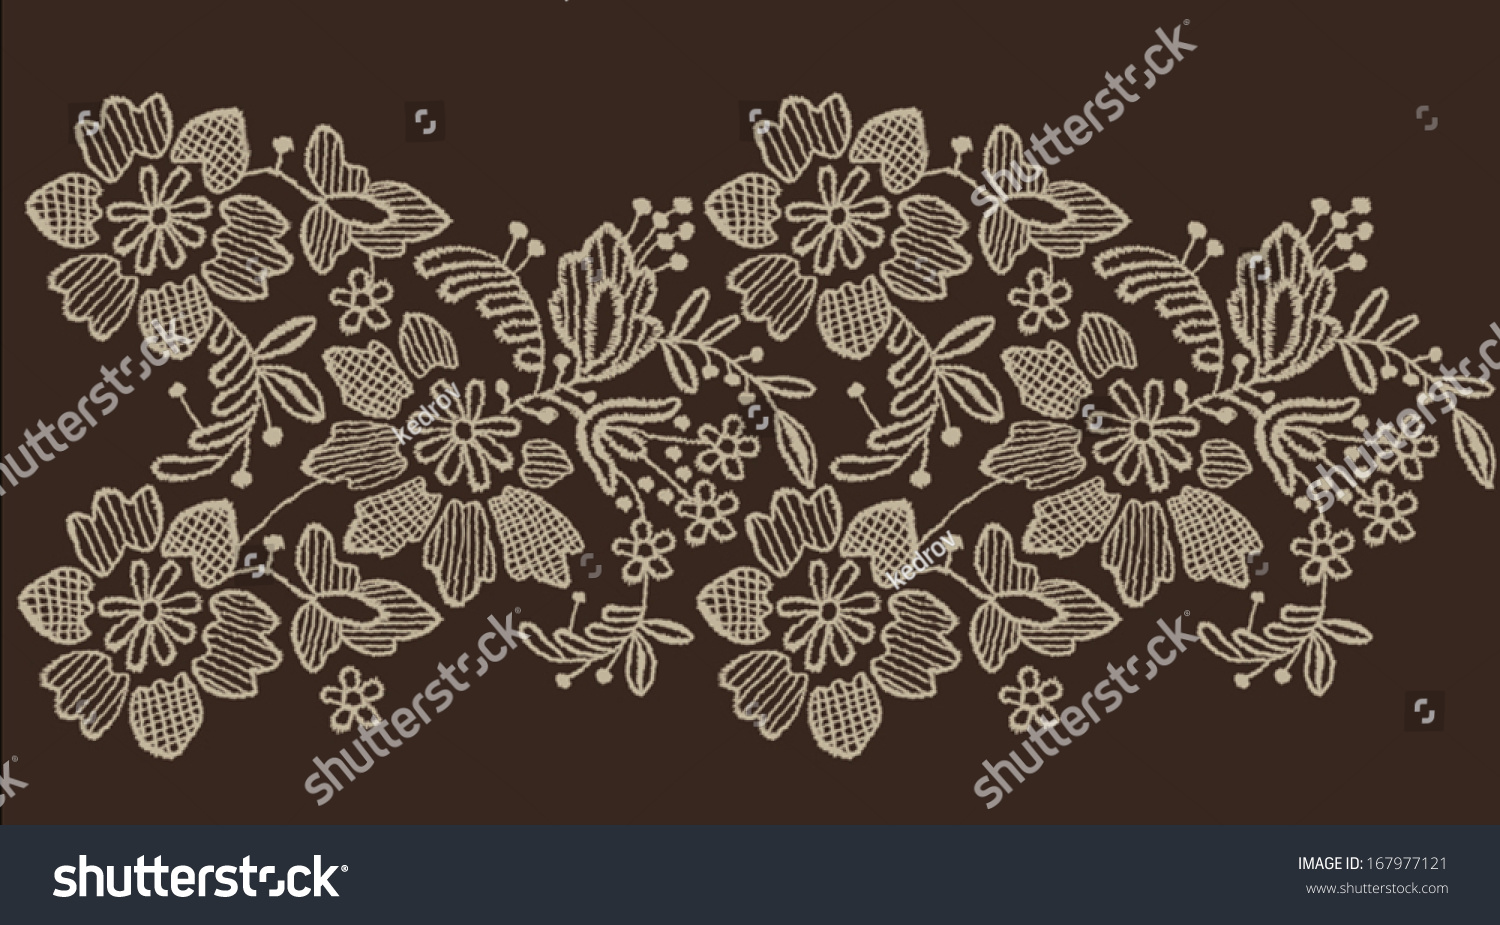 Floral Lace Vector Pattern Stock Vector 167977121 - Shutterstock